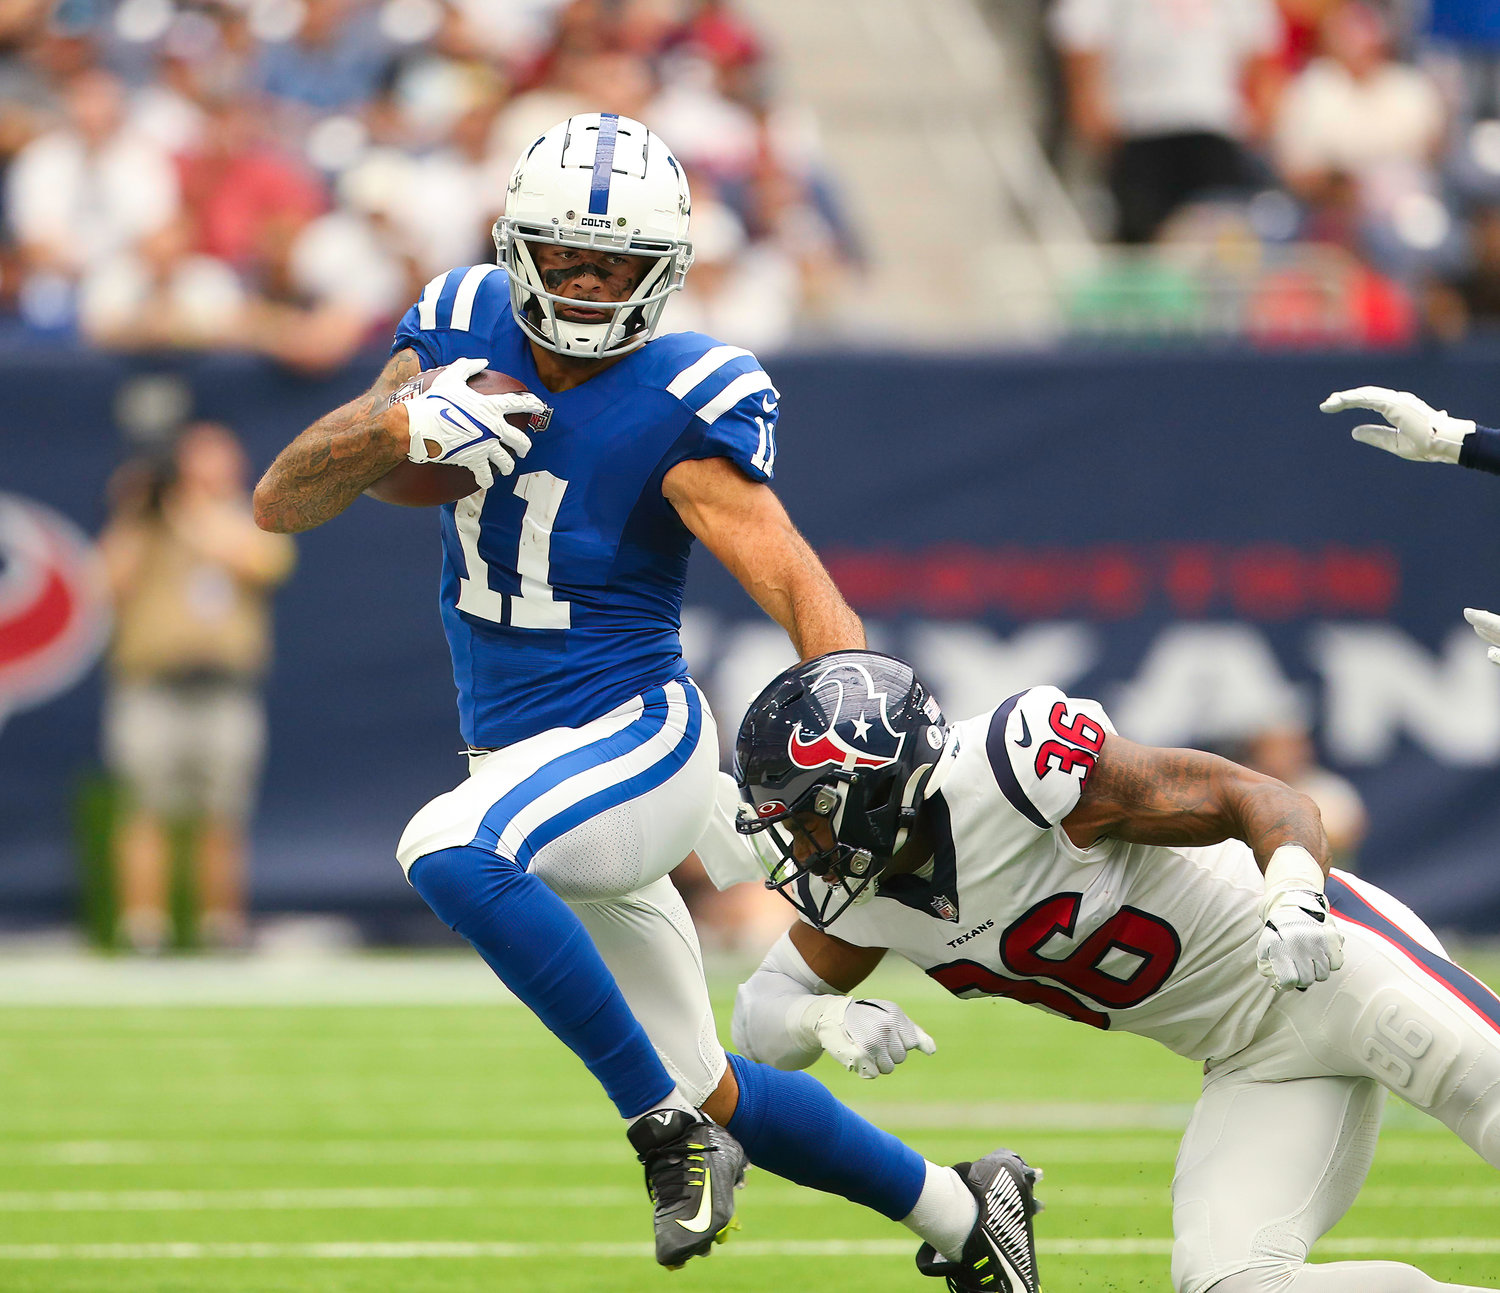 Indianapolis Colts wide receiver Michael Pittman Jr. (11) attempts to evade Houston Texans safety Jonathan Owens (36) during an NFL game between the Texans and the Colts on September 11, 2022 in Houston. The game ended in a 20-20 tie after a scoreless overtime period.